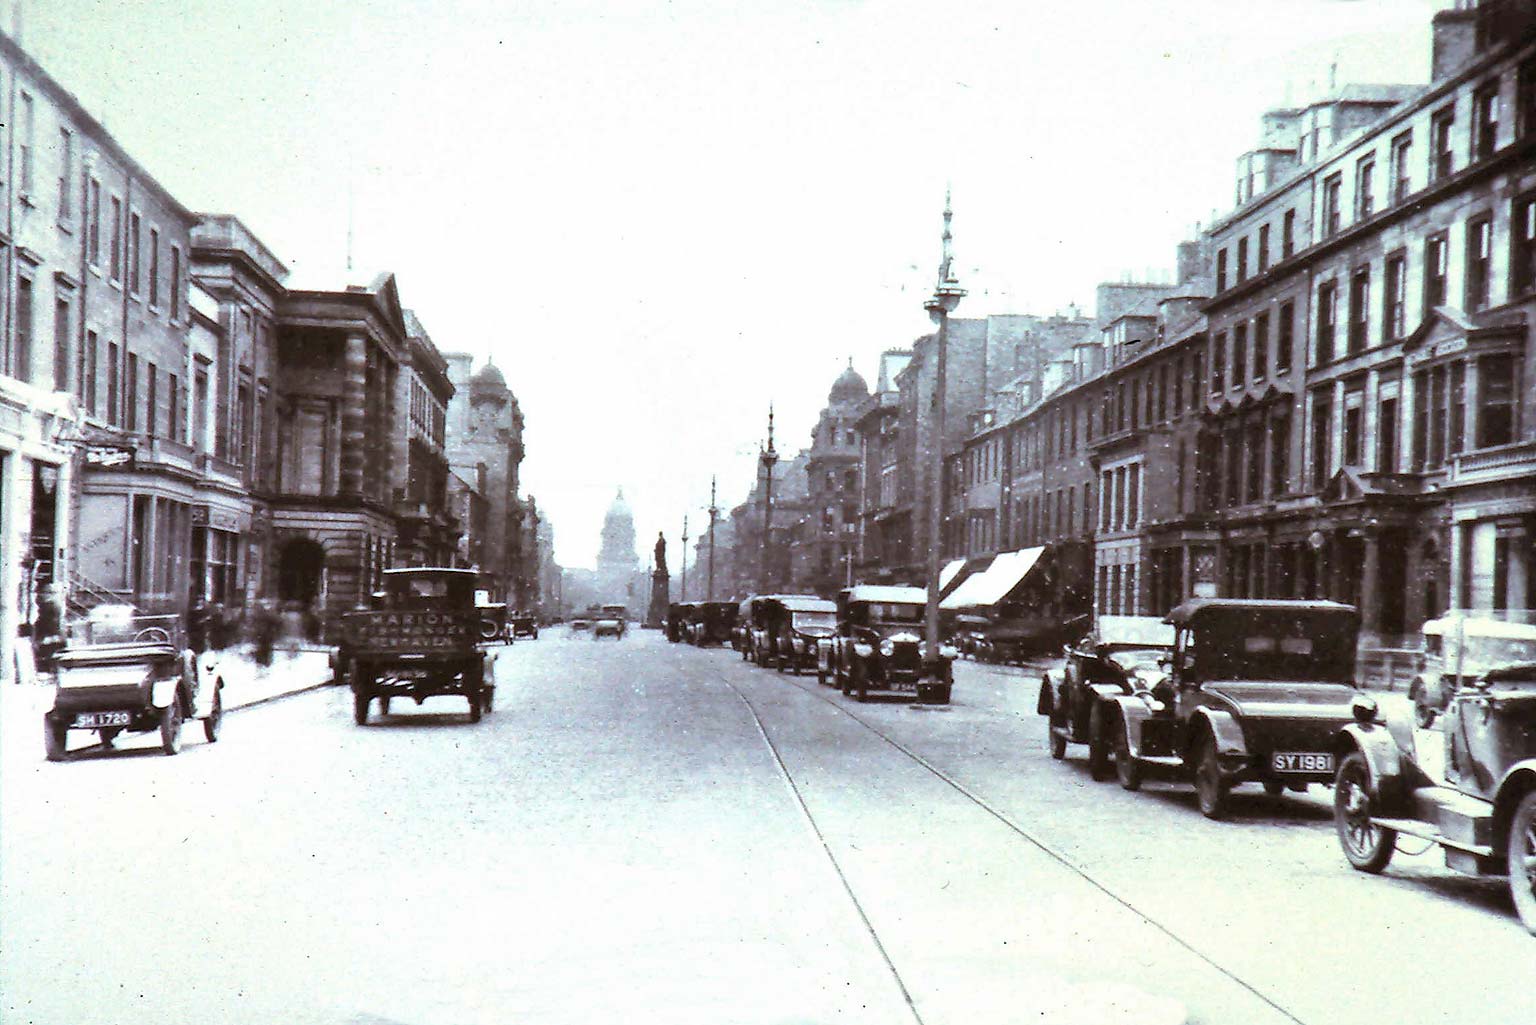 George Street in the 1920s  -  Marion Fishmonger Lorry and other vehicles